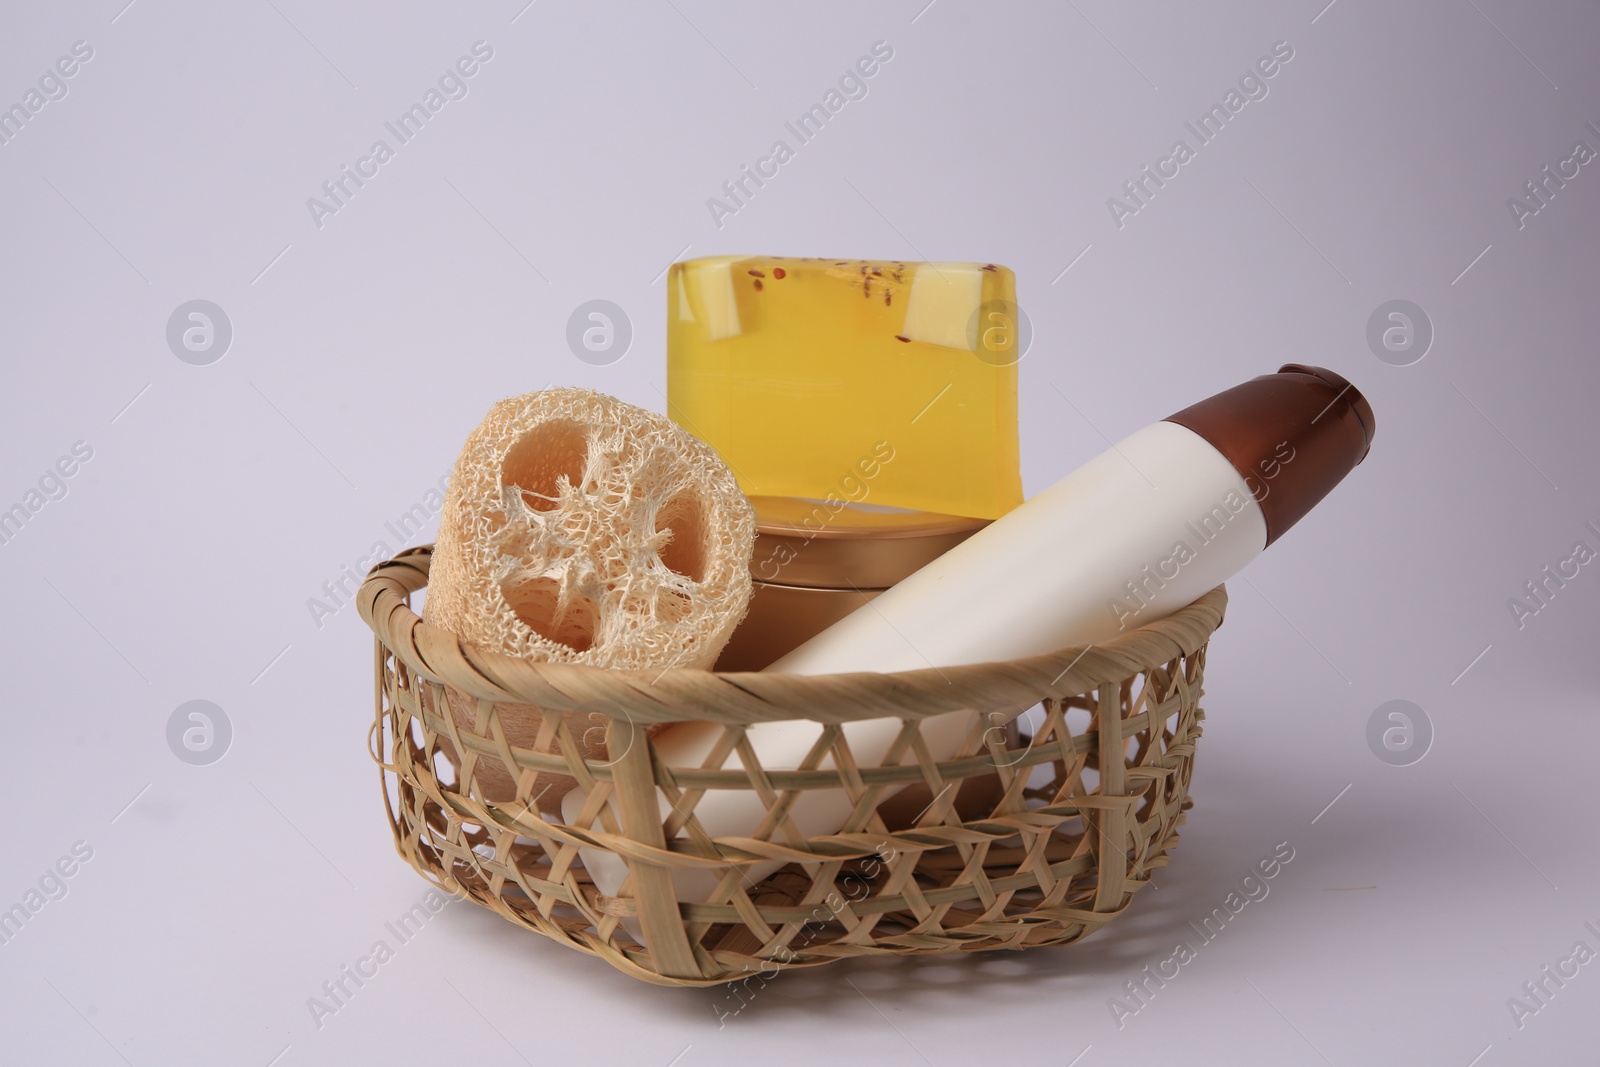 Photo of Wicker basket with loofah sponge and cosmetic products on white background